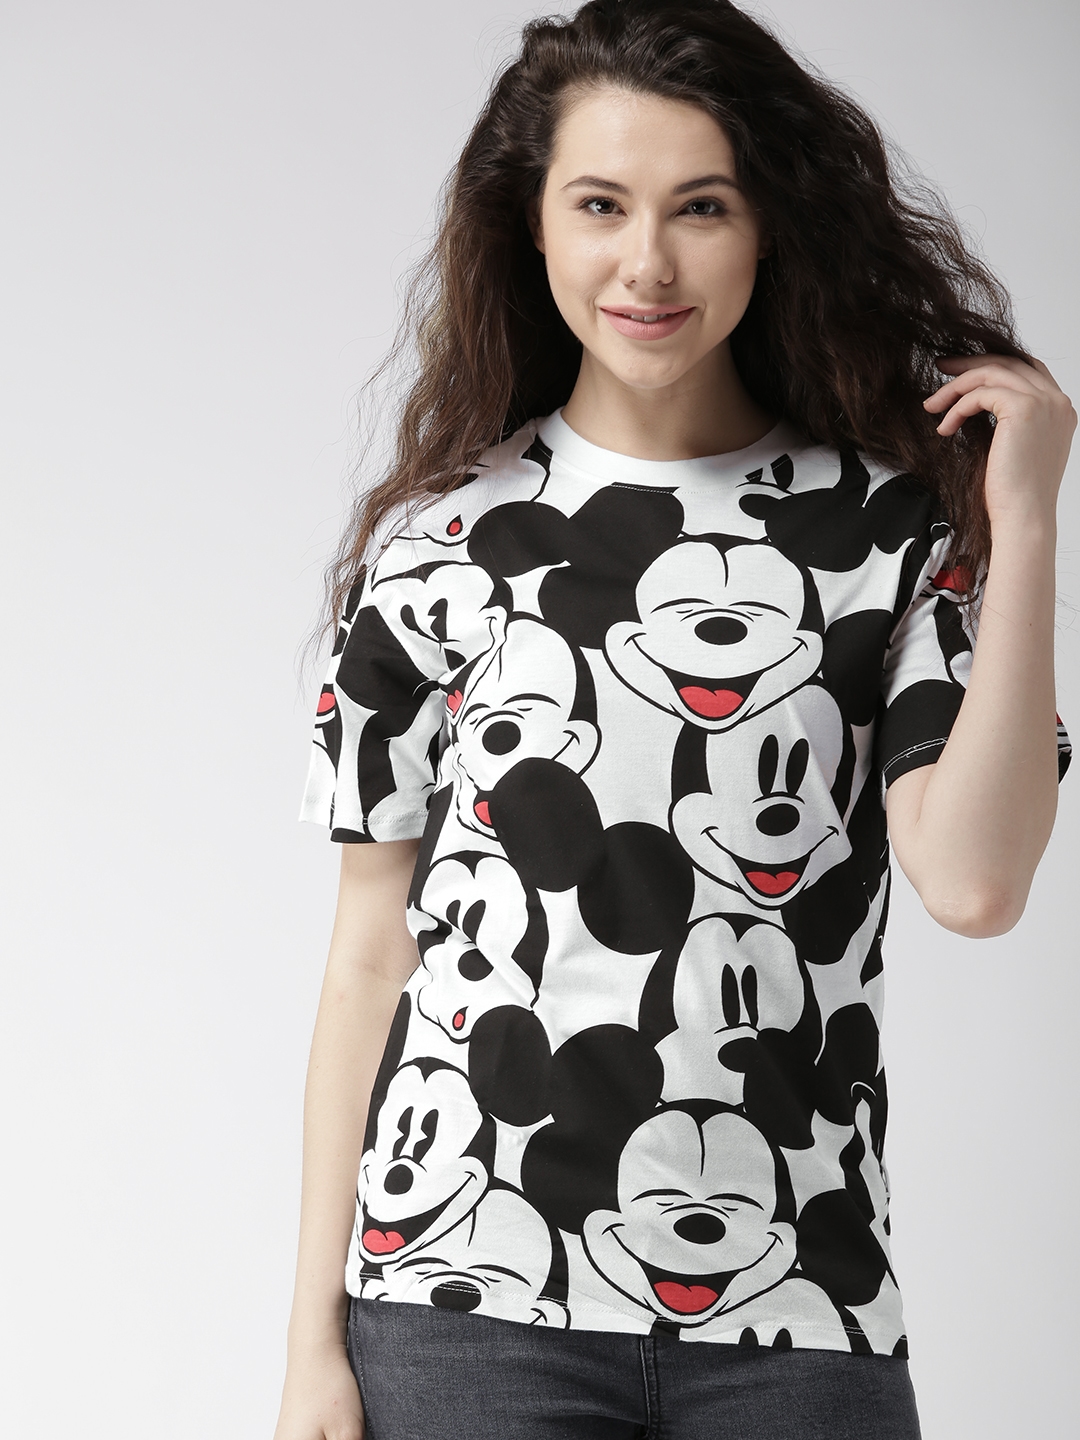 mickey mouse t shirt ladies